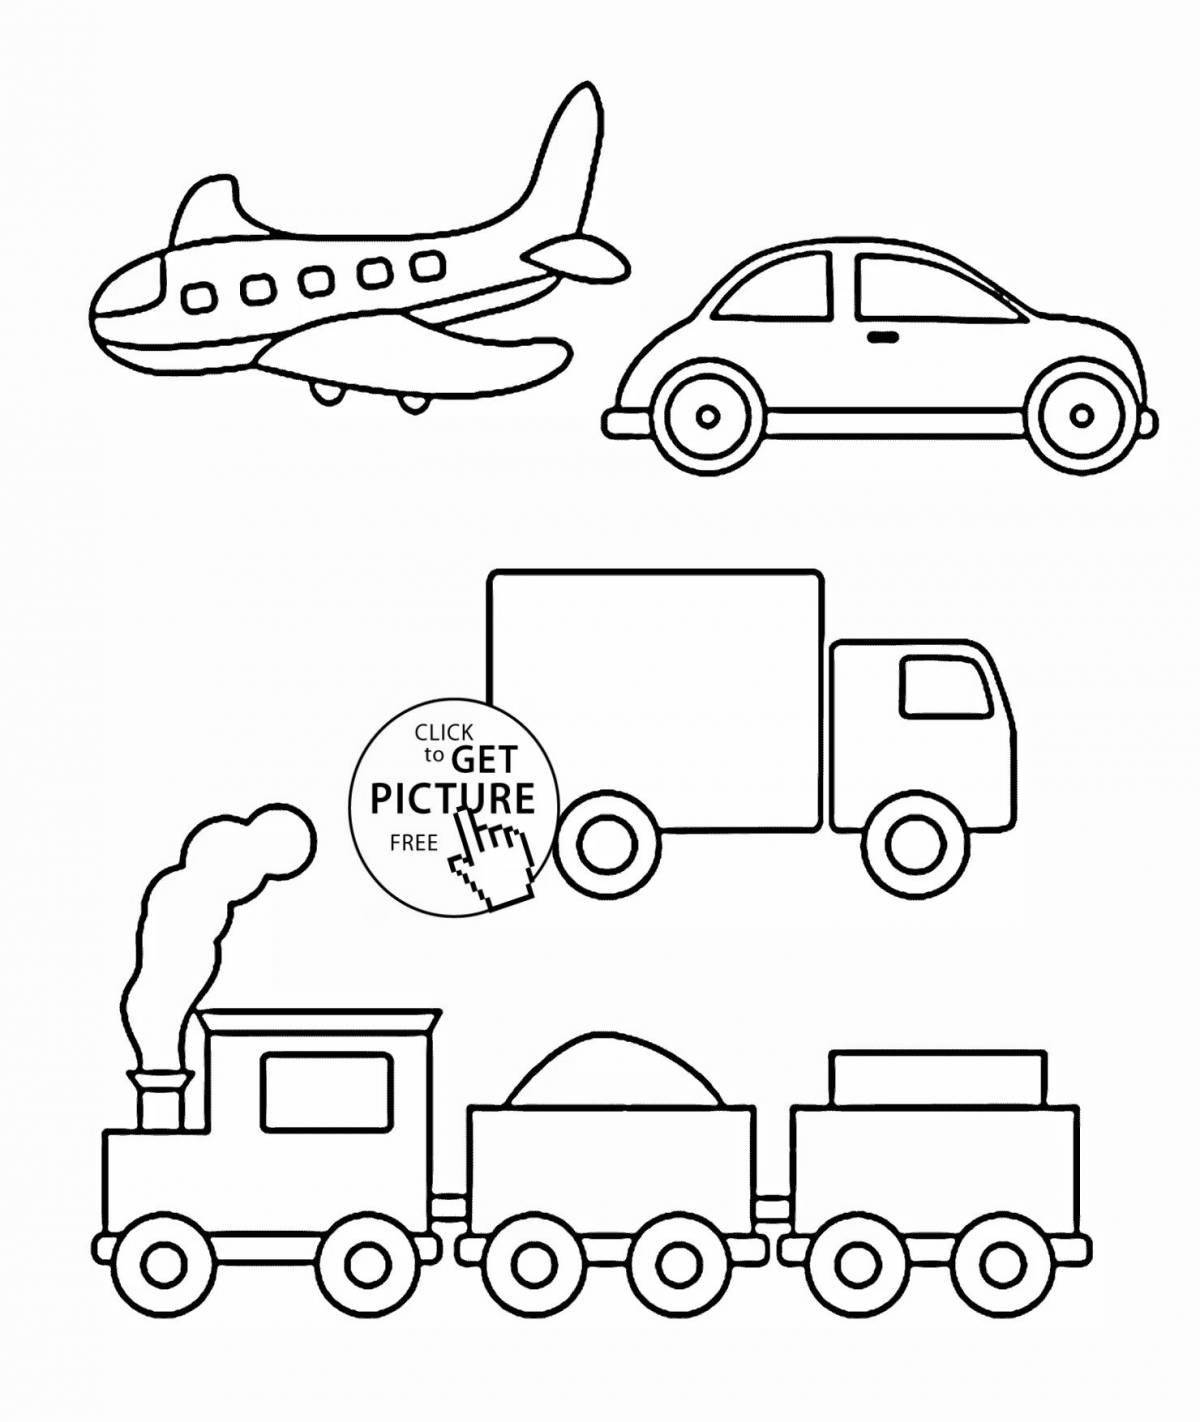 Cute transportation coloring page for 2-3 year olds